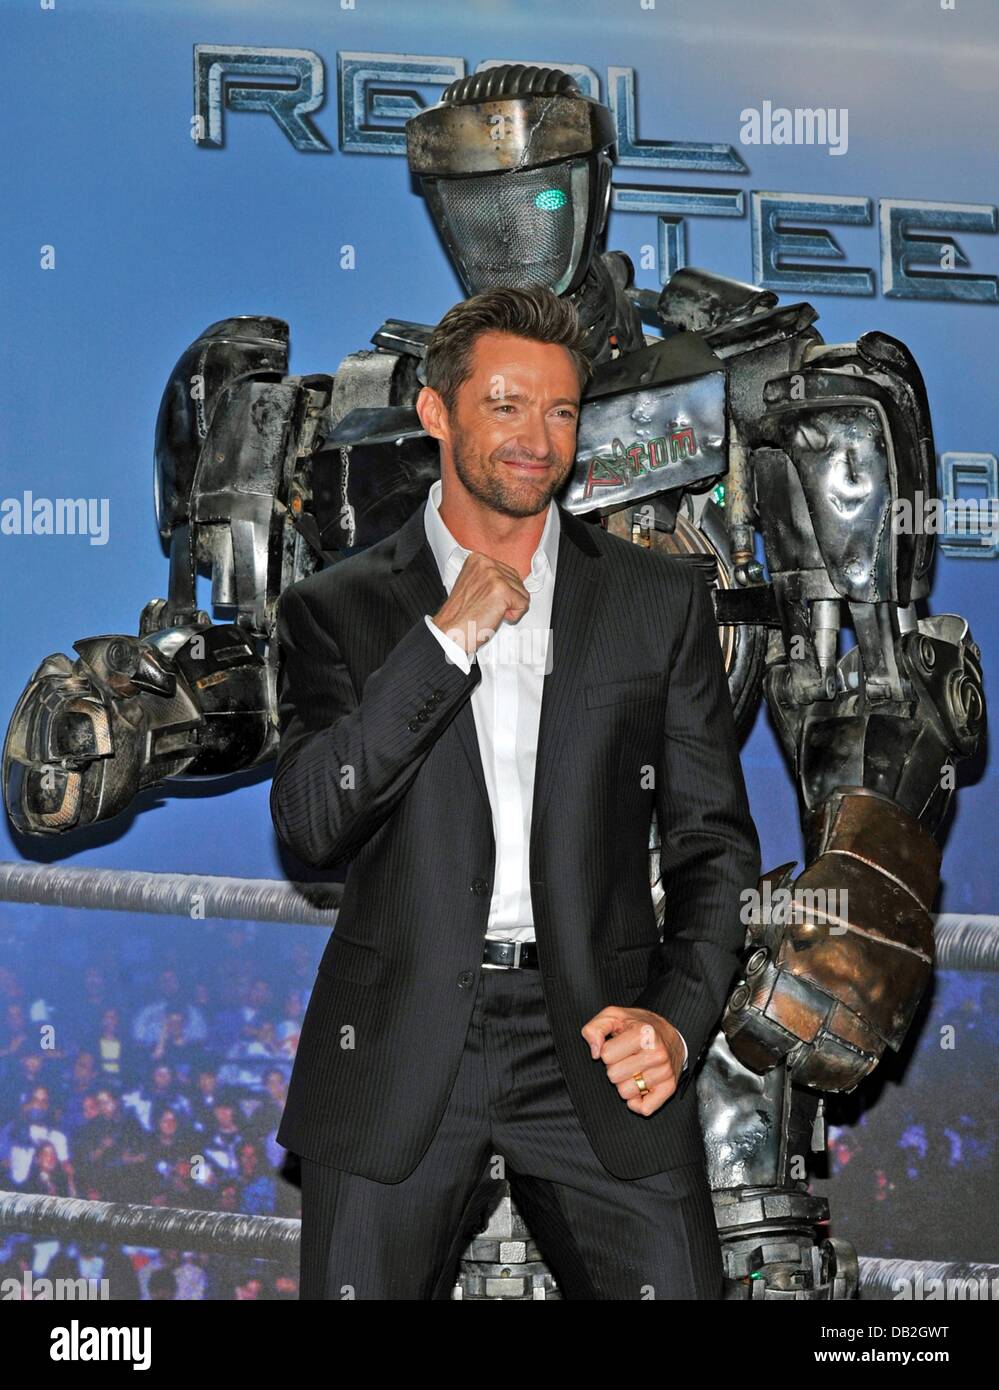 Australian actor Hugh Jackman poses with the robot 'Atom' during a  photocall for the film 'Real Steel in Munich, Germany, 12 September 2011.  The film arrives German cinemas on 10 November 2011